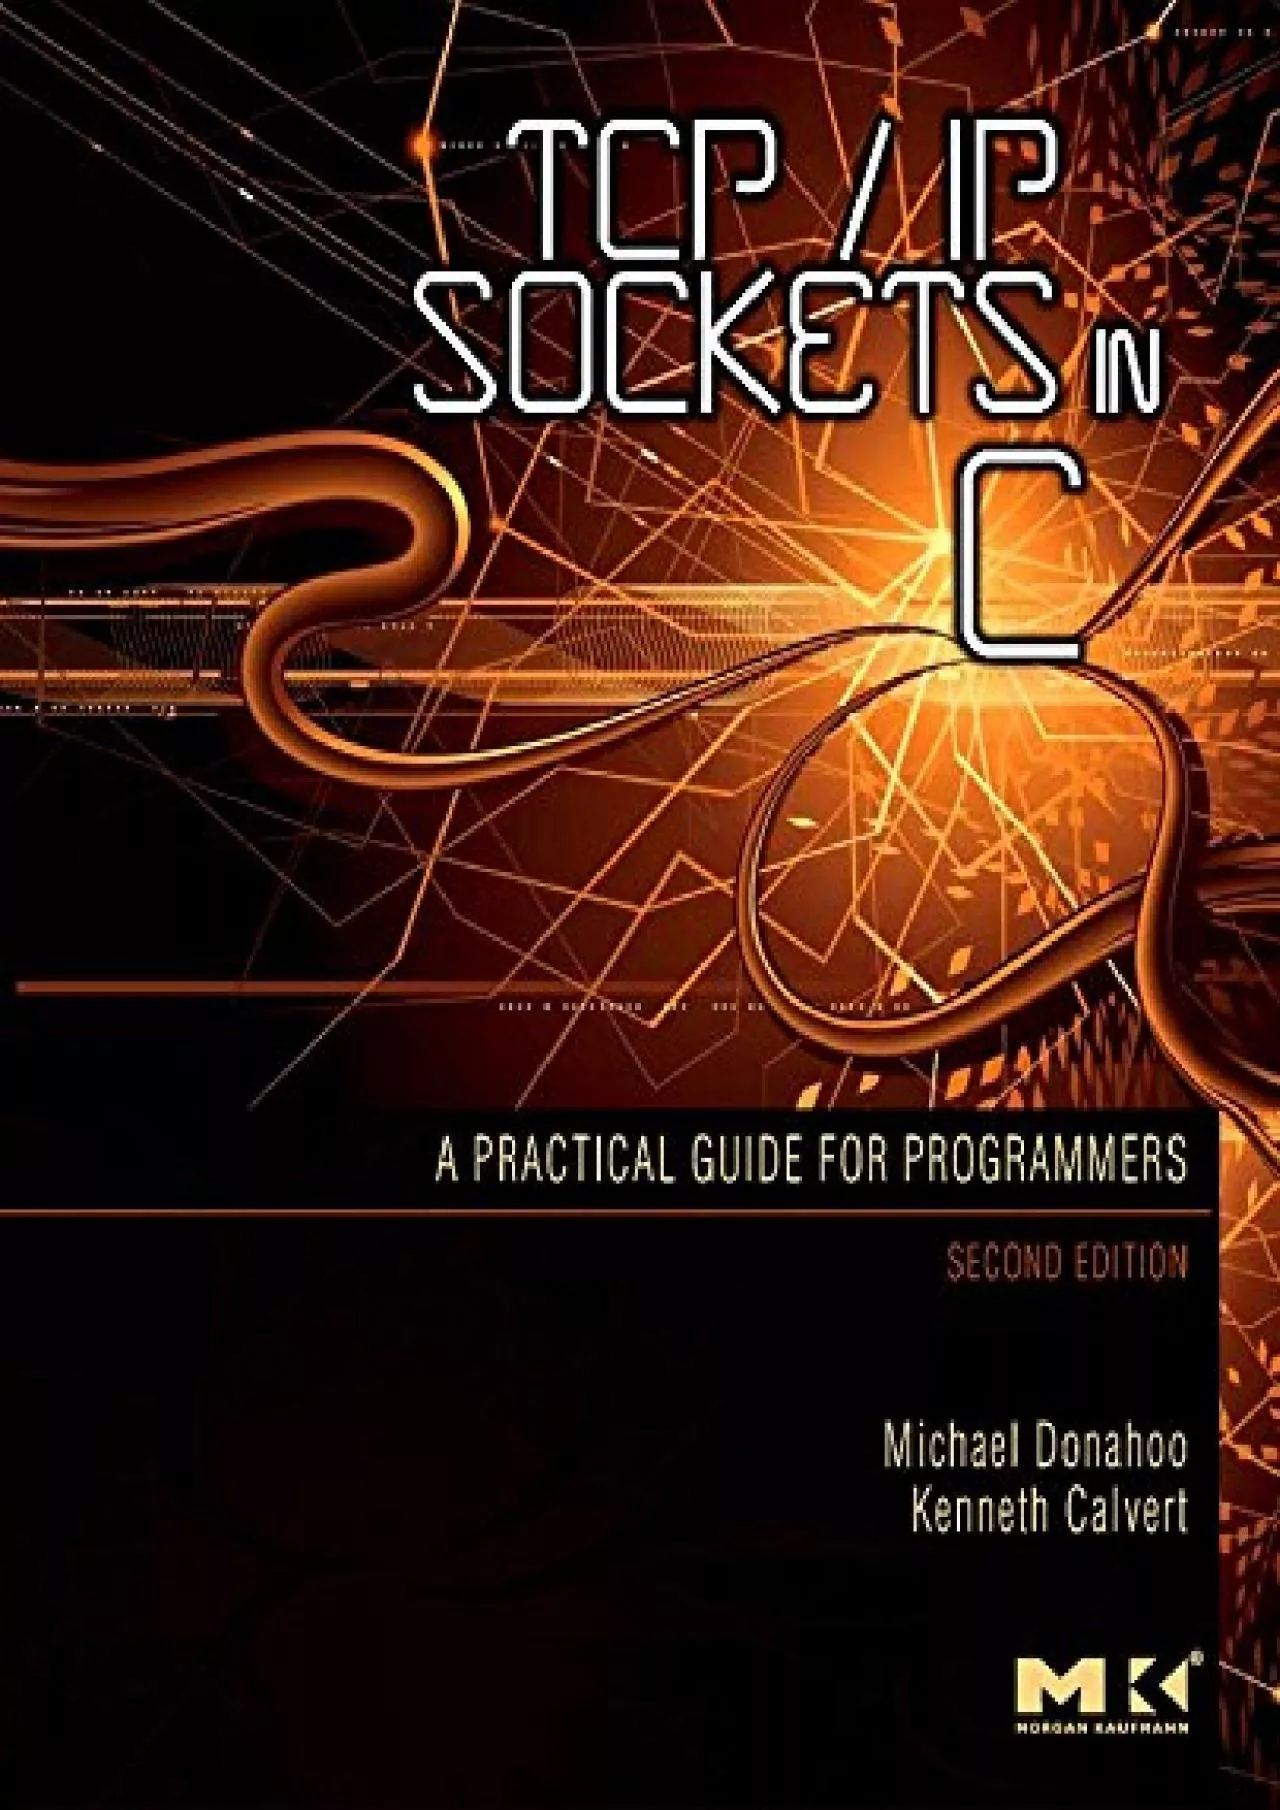 [FREE]-TCP/IP Sockets in C: Practical Guide for Programmers (Morgan Kaufmann Practical